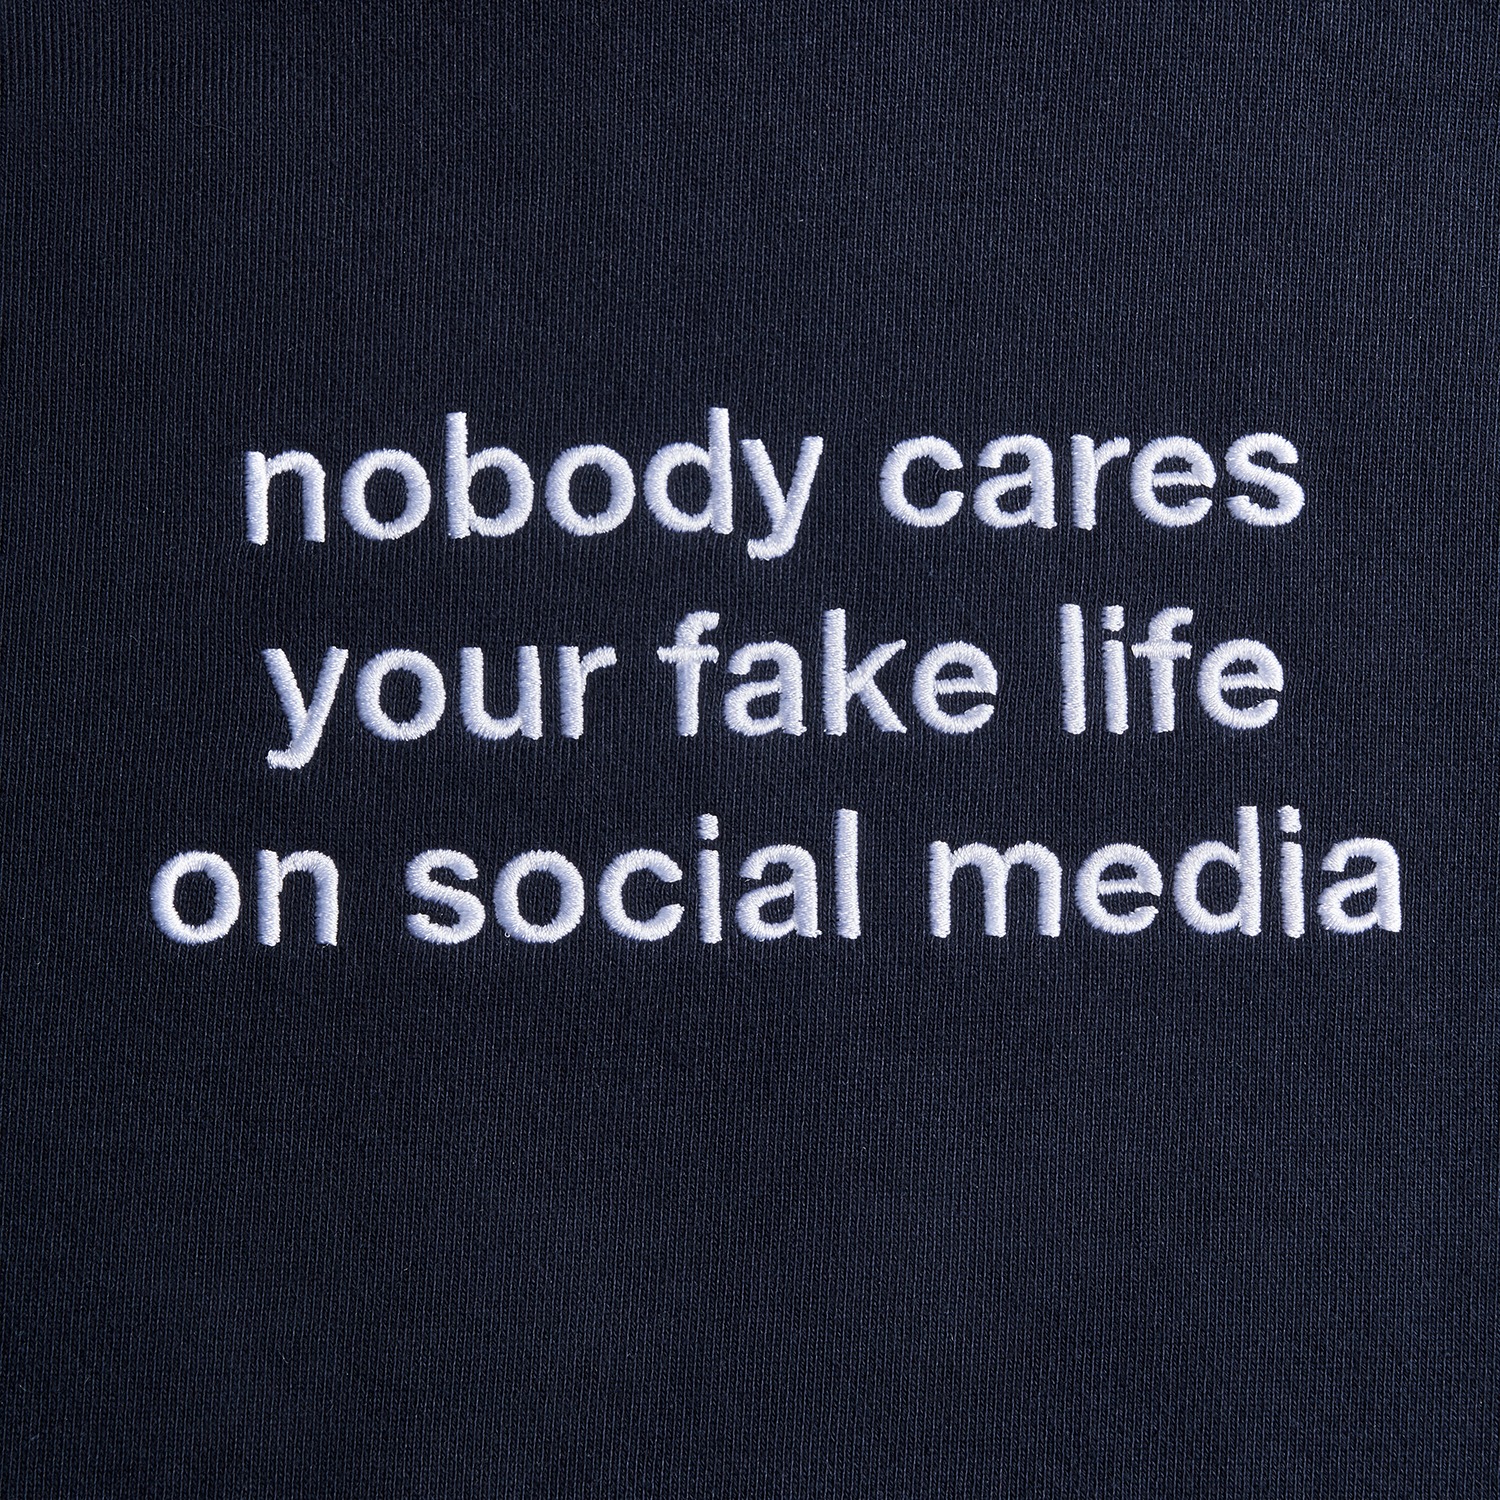 NOBODY CARES YOUR FAKE LIFE HOODIE (NAVY)